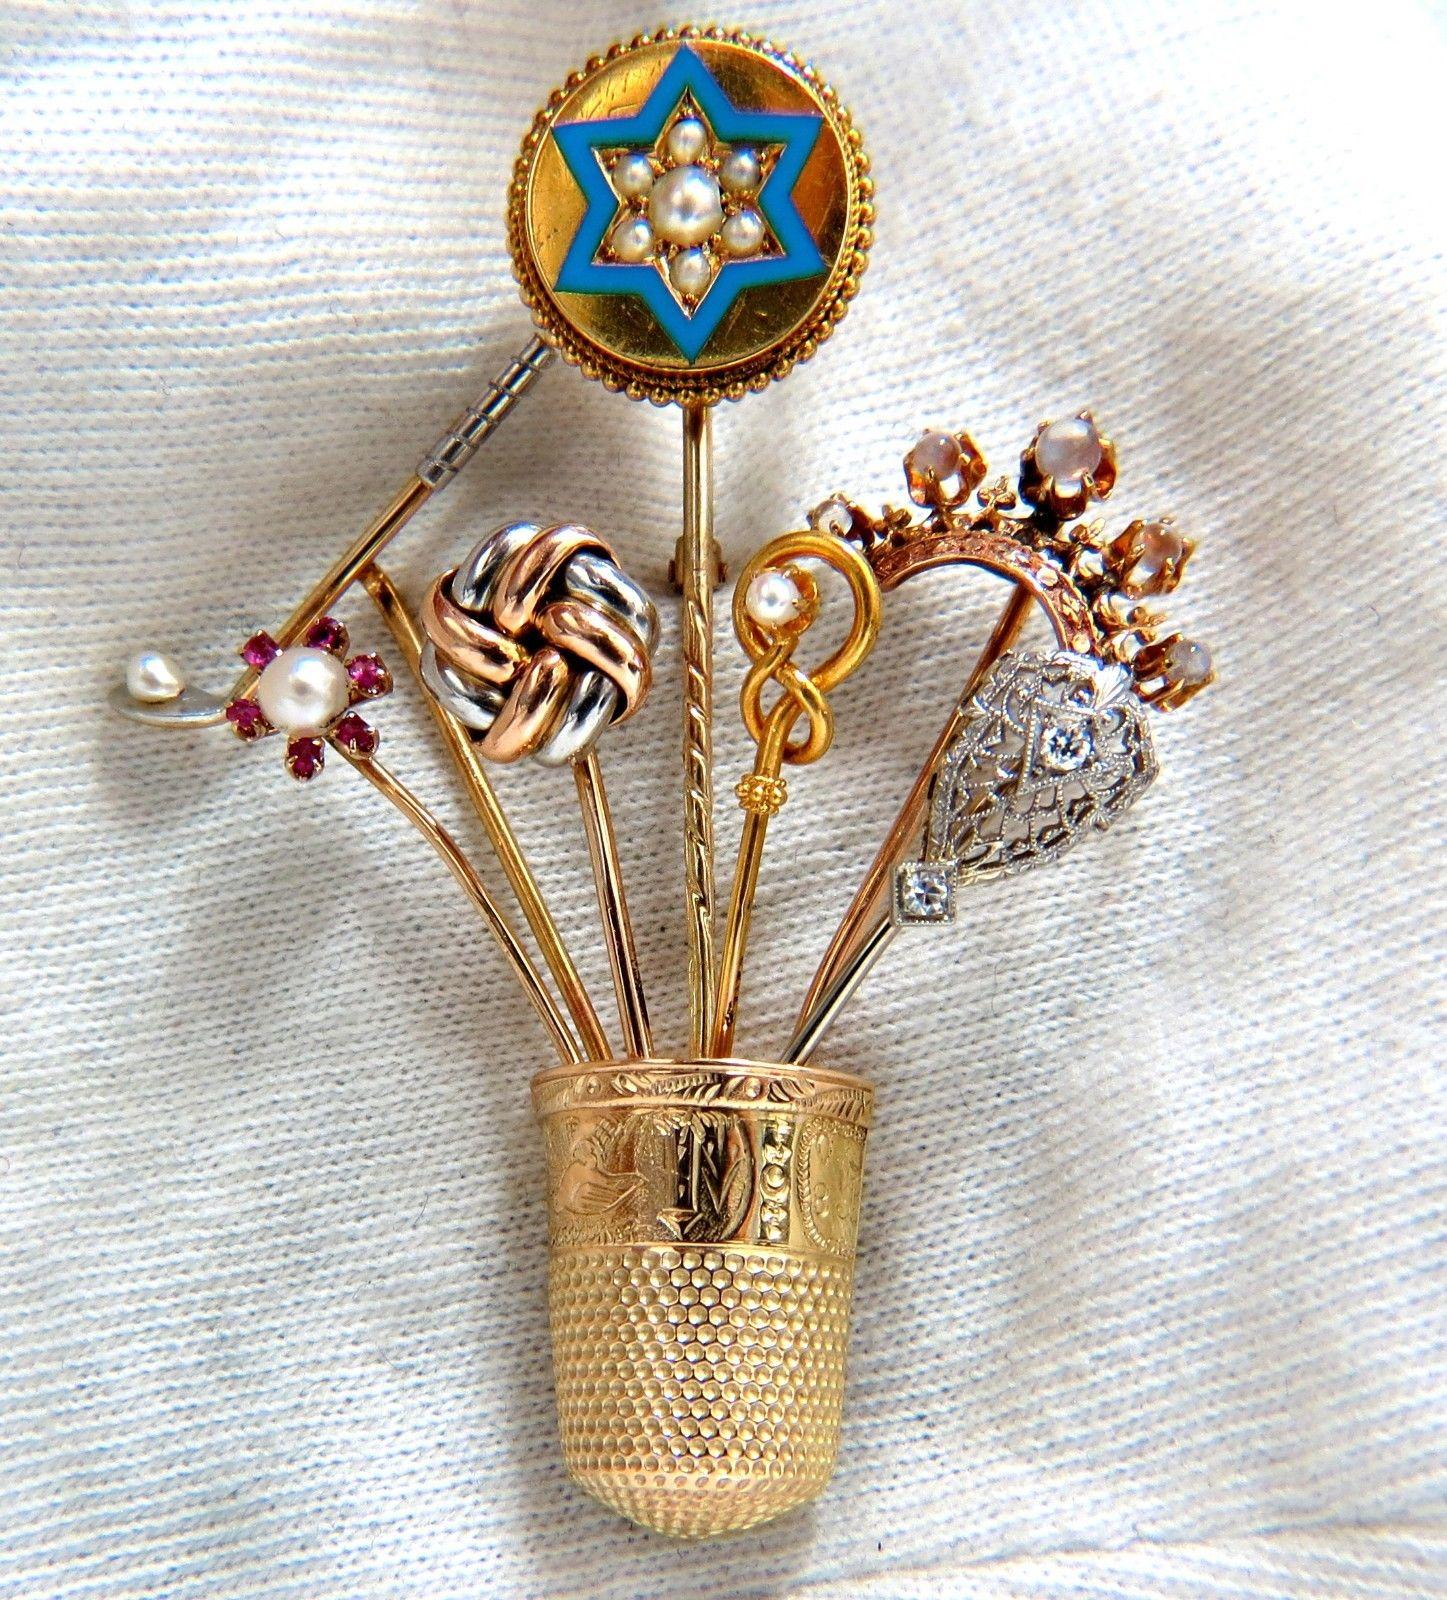 Vintage Seamstress Thimble & Pins

Polo & Pearl

Pearl & Ruby cluster

Love Knot

Infinity & Pearl

Edwardian Filigree & .10ct

British Crown

Star of David & Pearl cluster

  

14kt yellow gold 

18 grams.

Overall: 2.7 X 2 inch